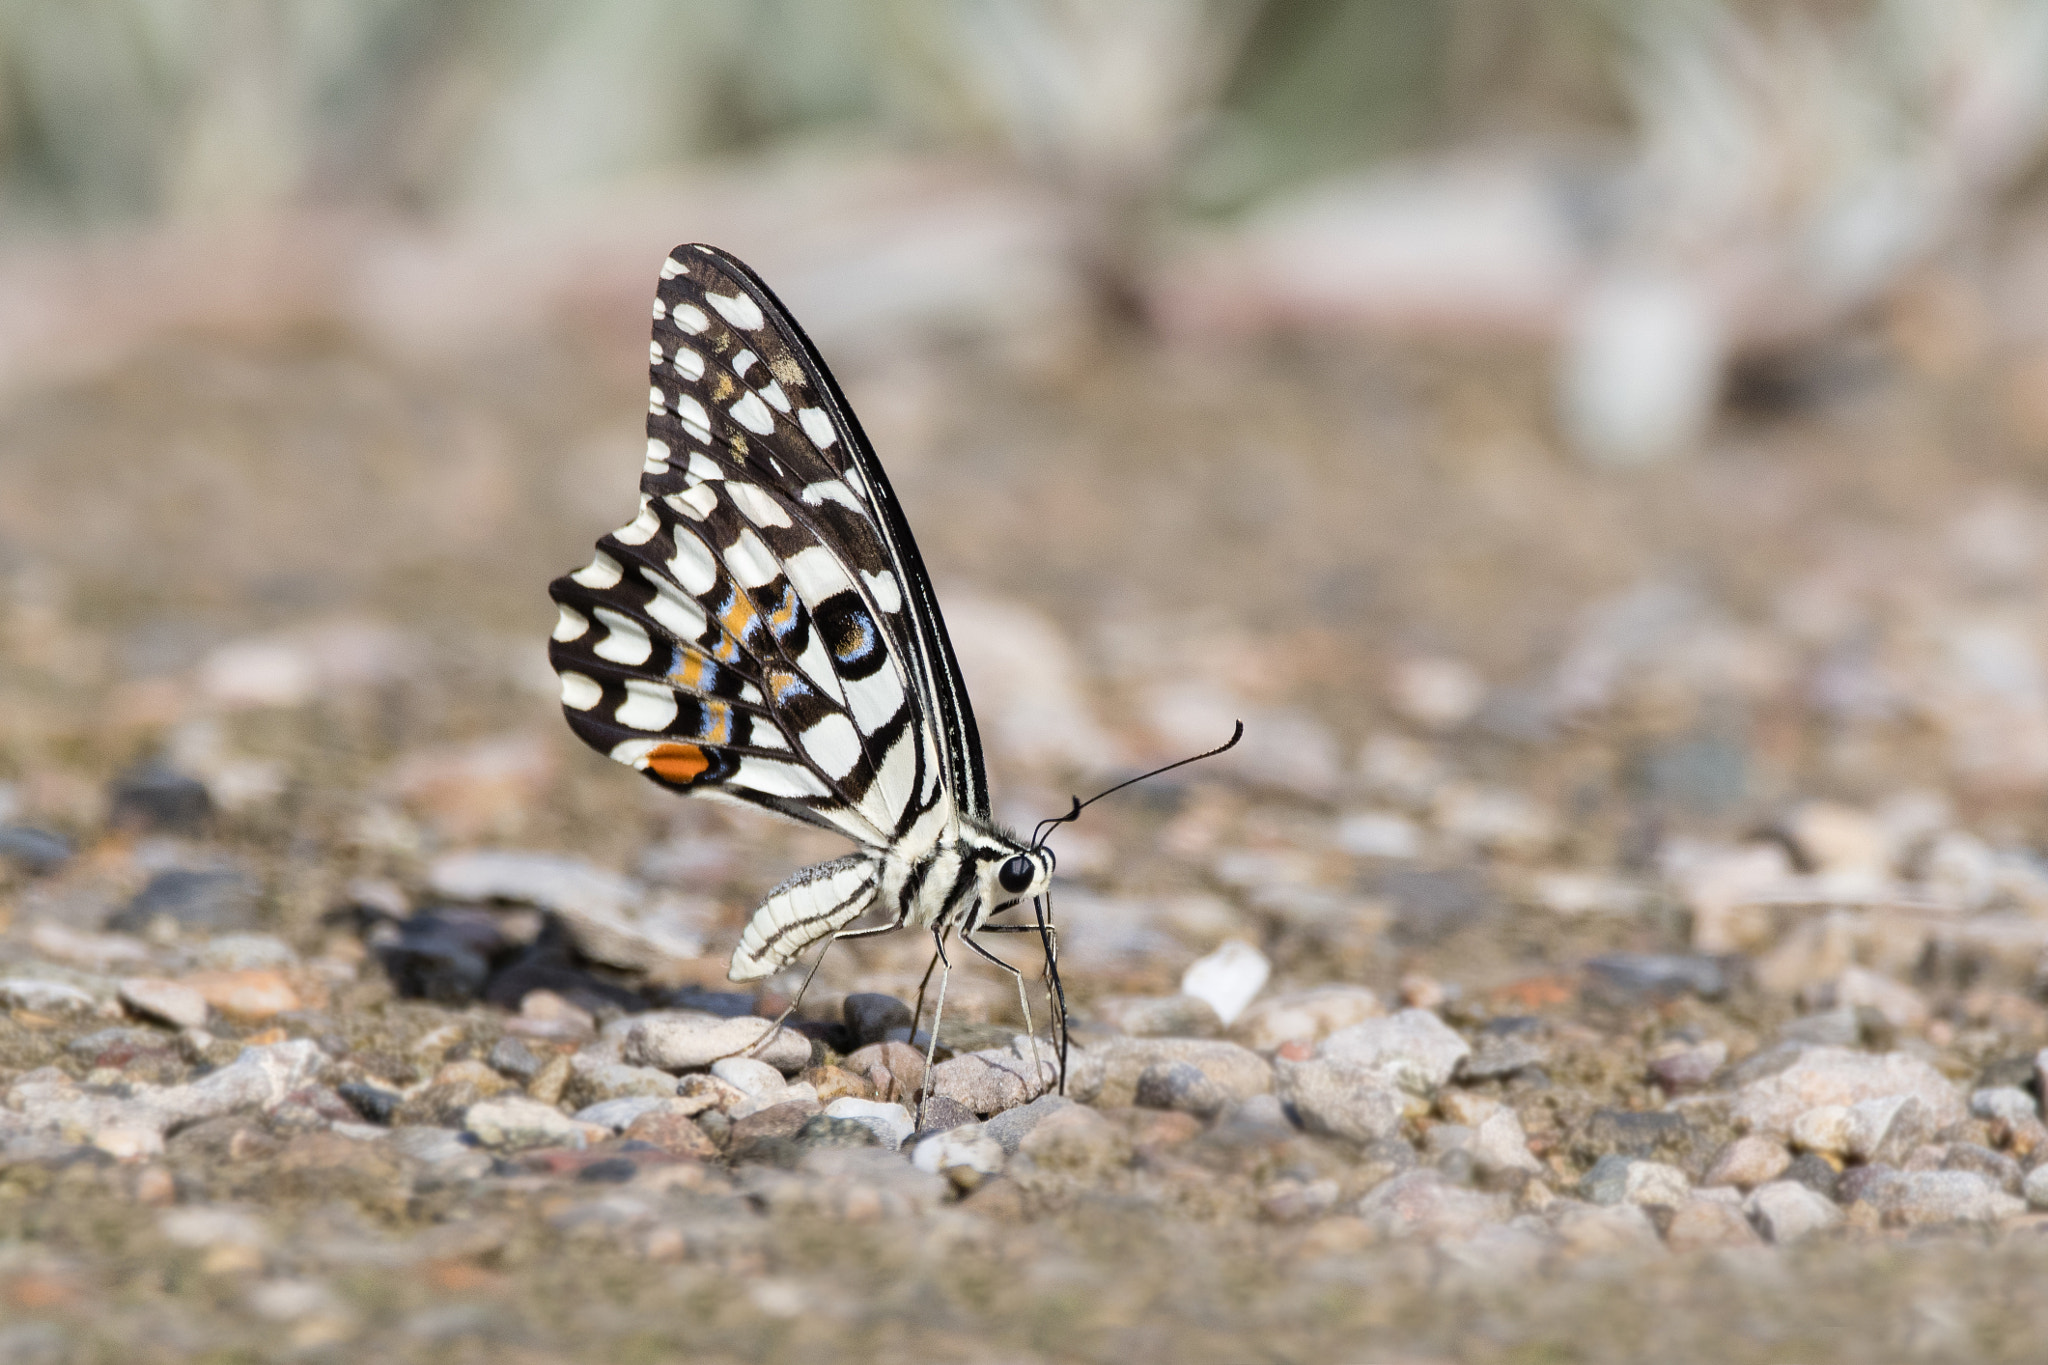 Nikon D500 + Sigma 150-600mm F5-6.3 DG OS HSM | C sample photo. Butterfly photography